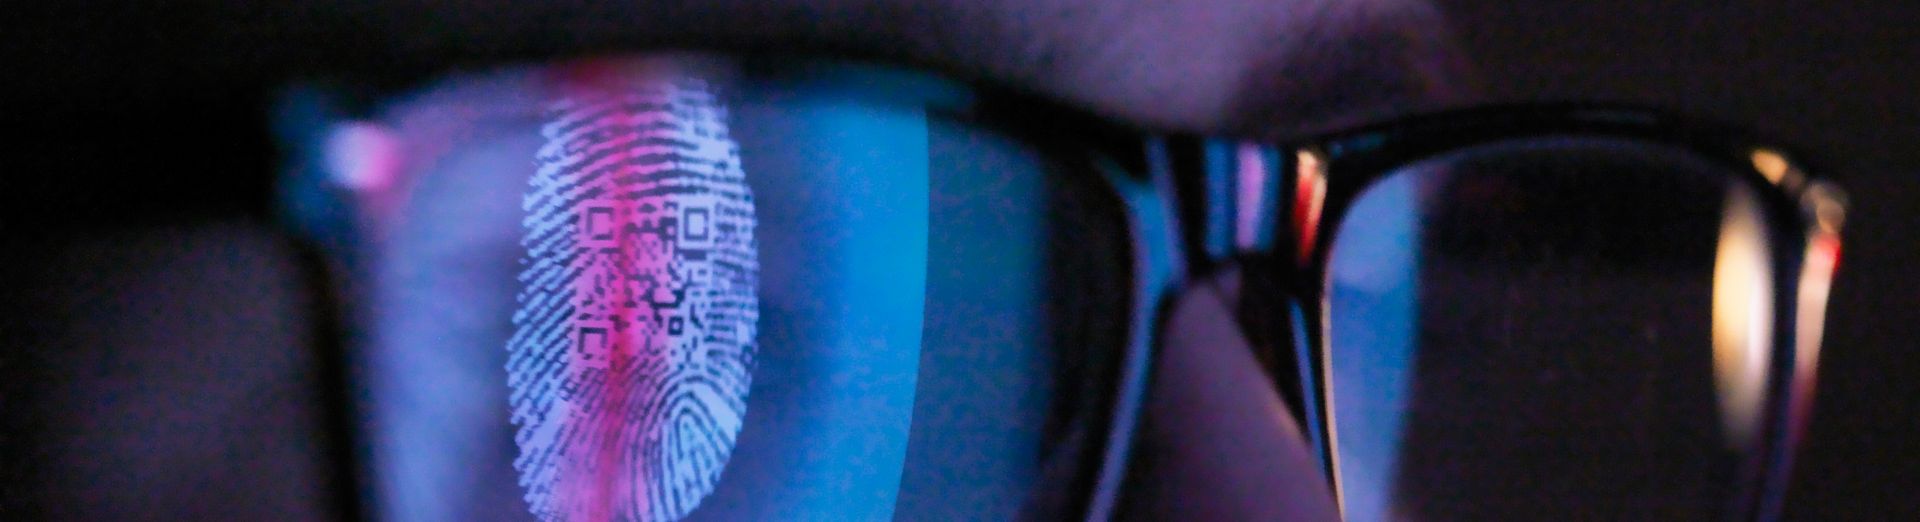 Close up of face, reflection of fingerprint in glasses